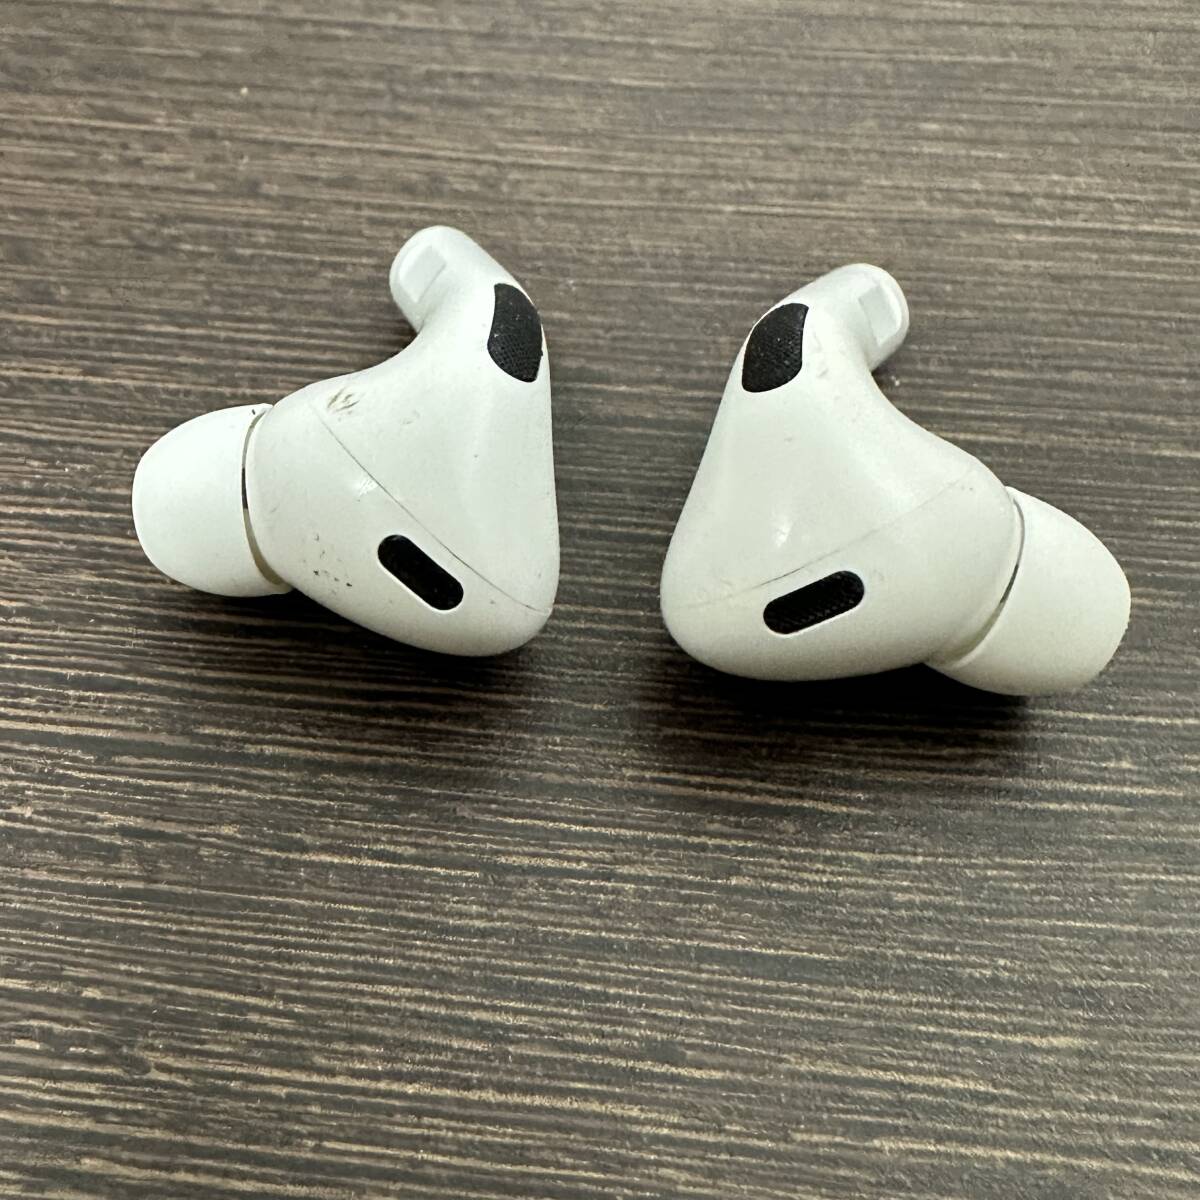 ☆★H1587【送料込み】Apple AirPods Pro MQD83J/A A2700 A2698 A2699 第2世代 AirPods Pro MagSafe 充電ケース ケーブル・箱付きの画像7